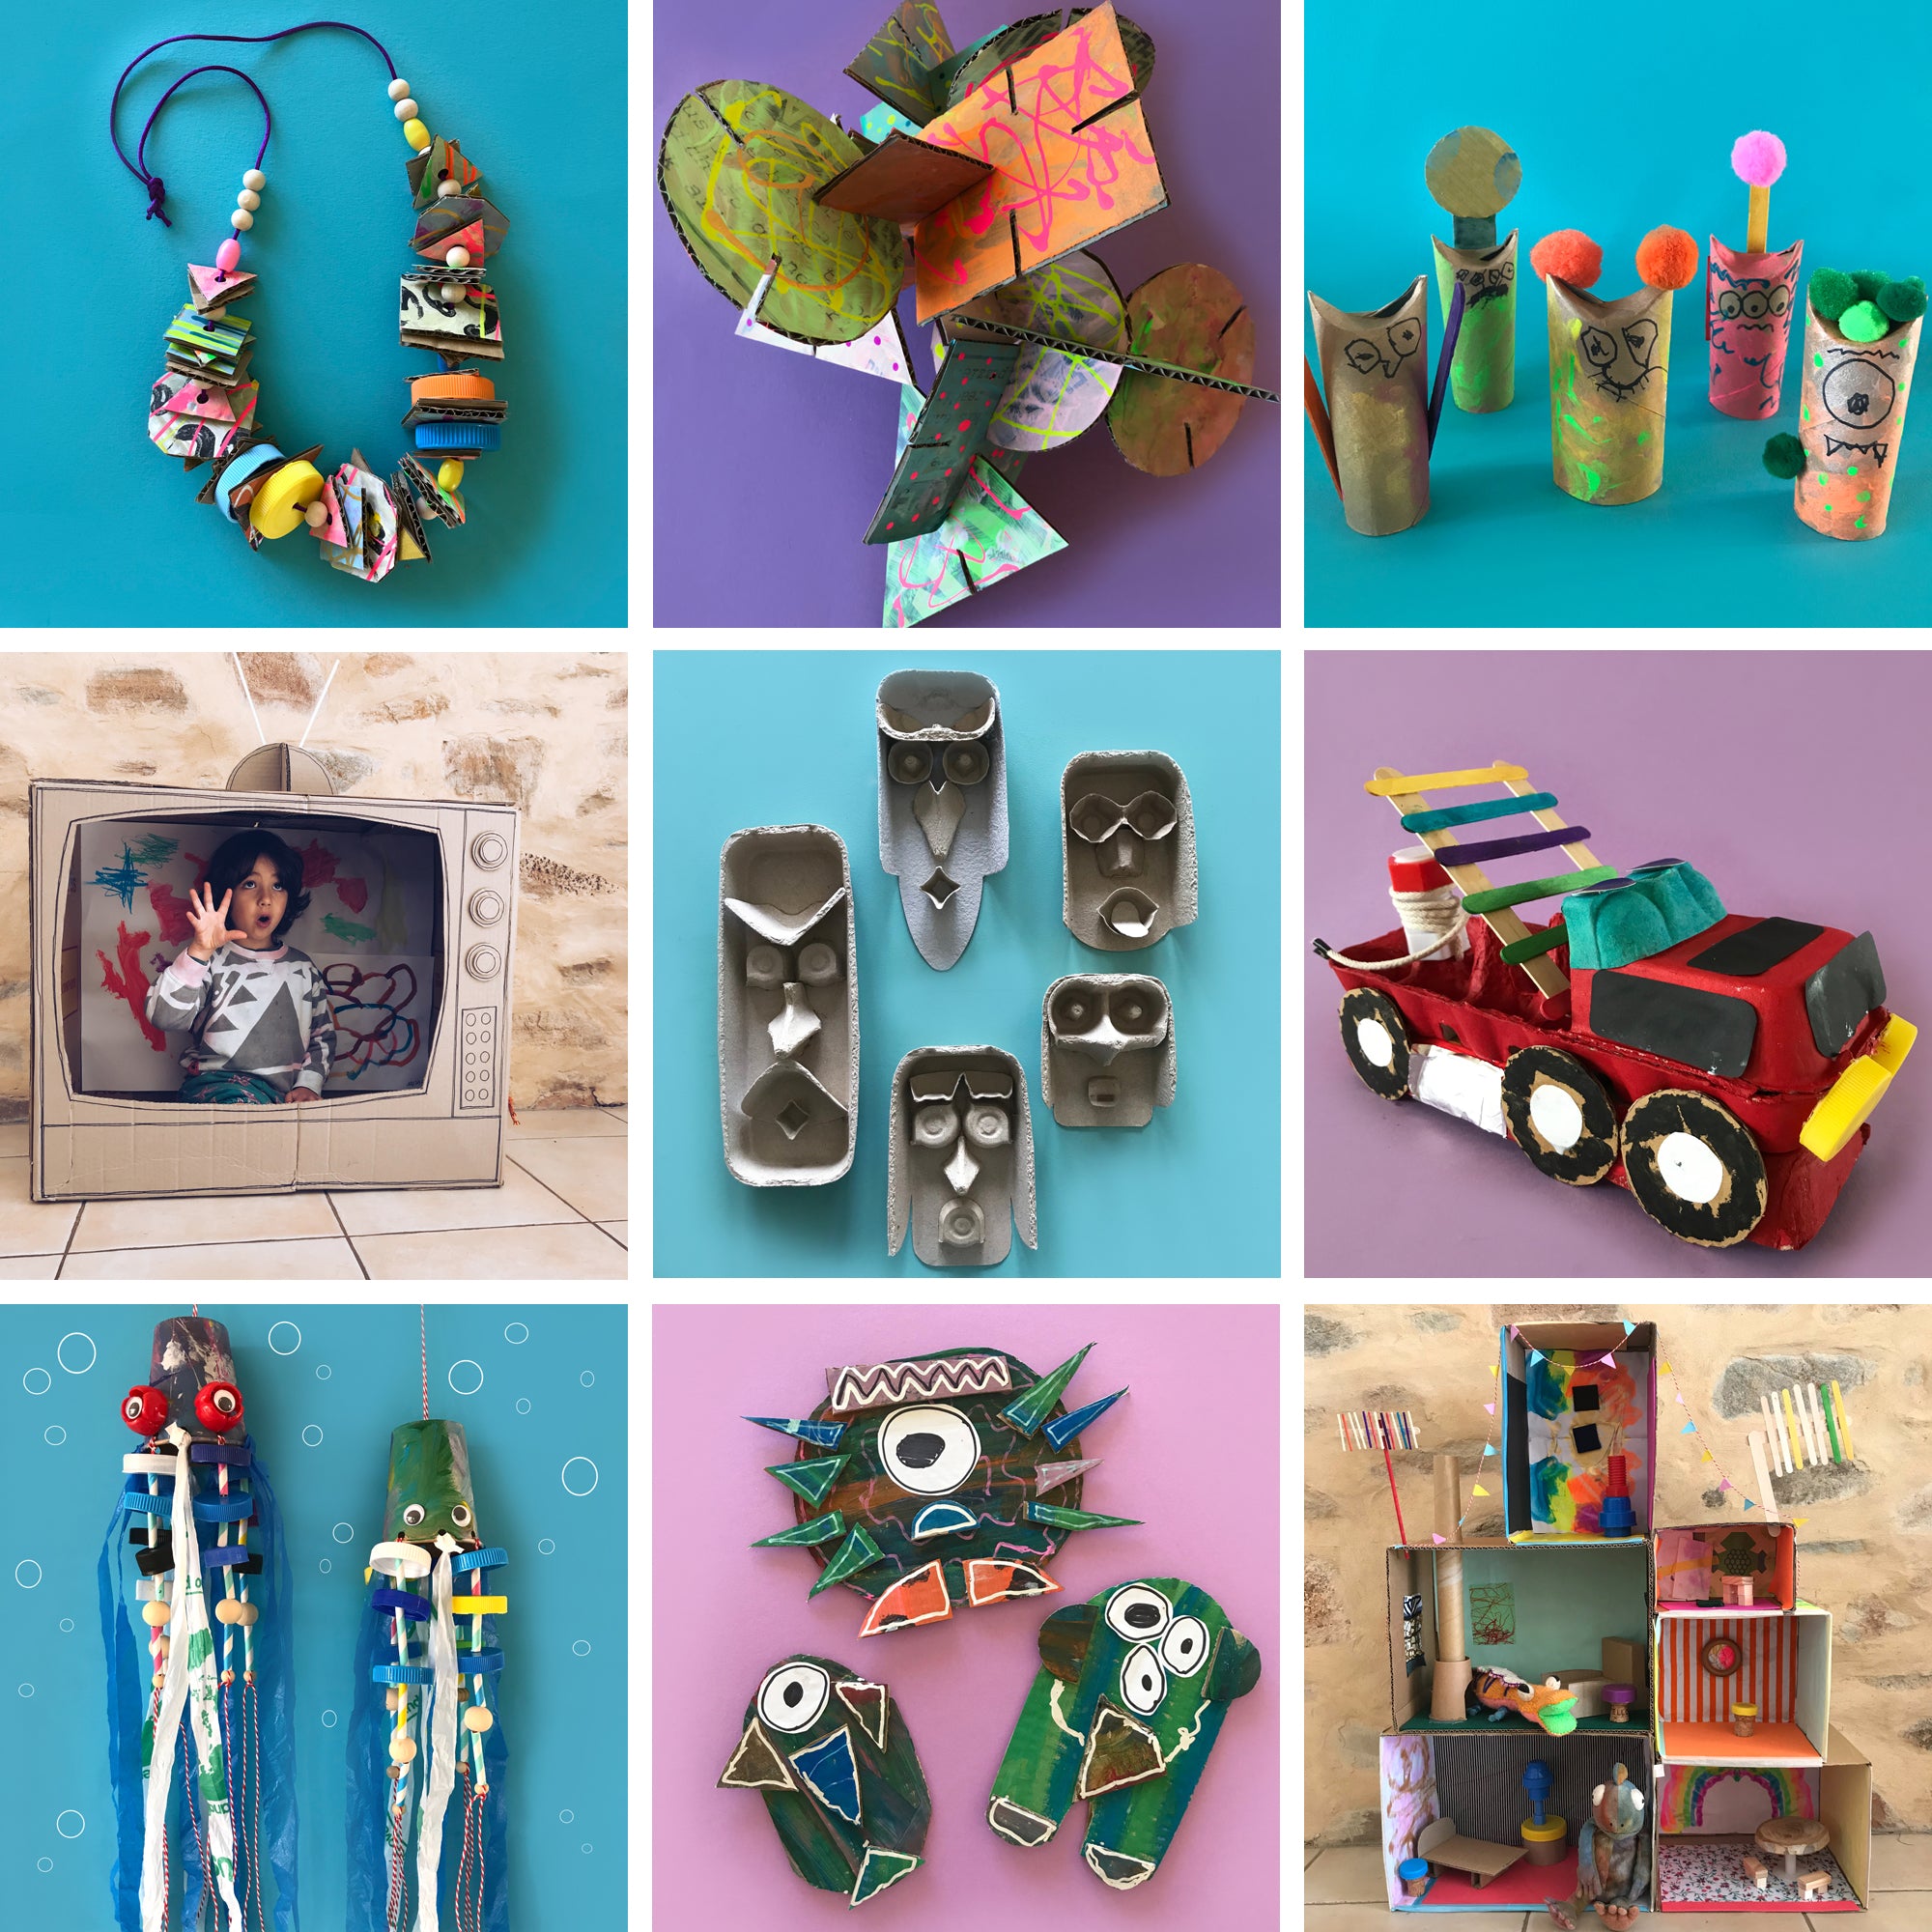 10 Creative Recycled Crafts to Try for Kids and Adults